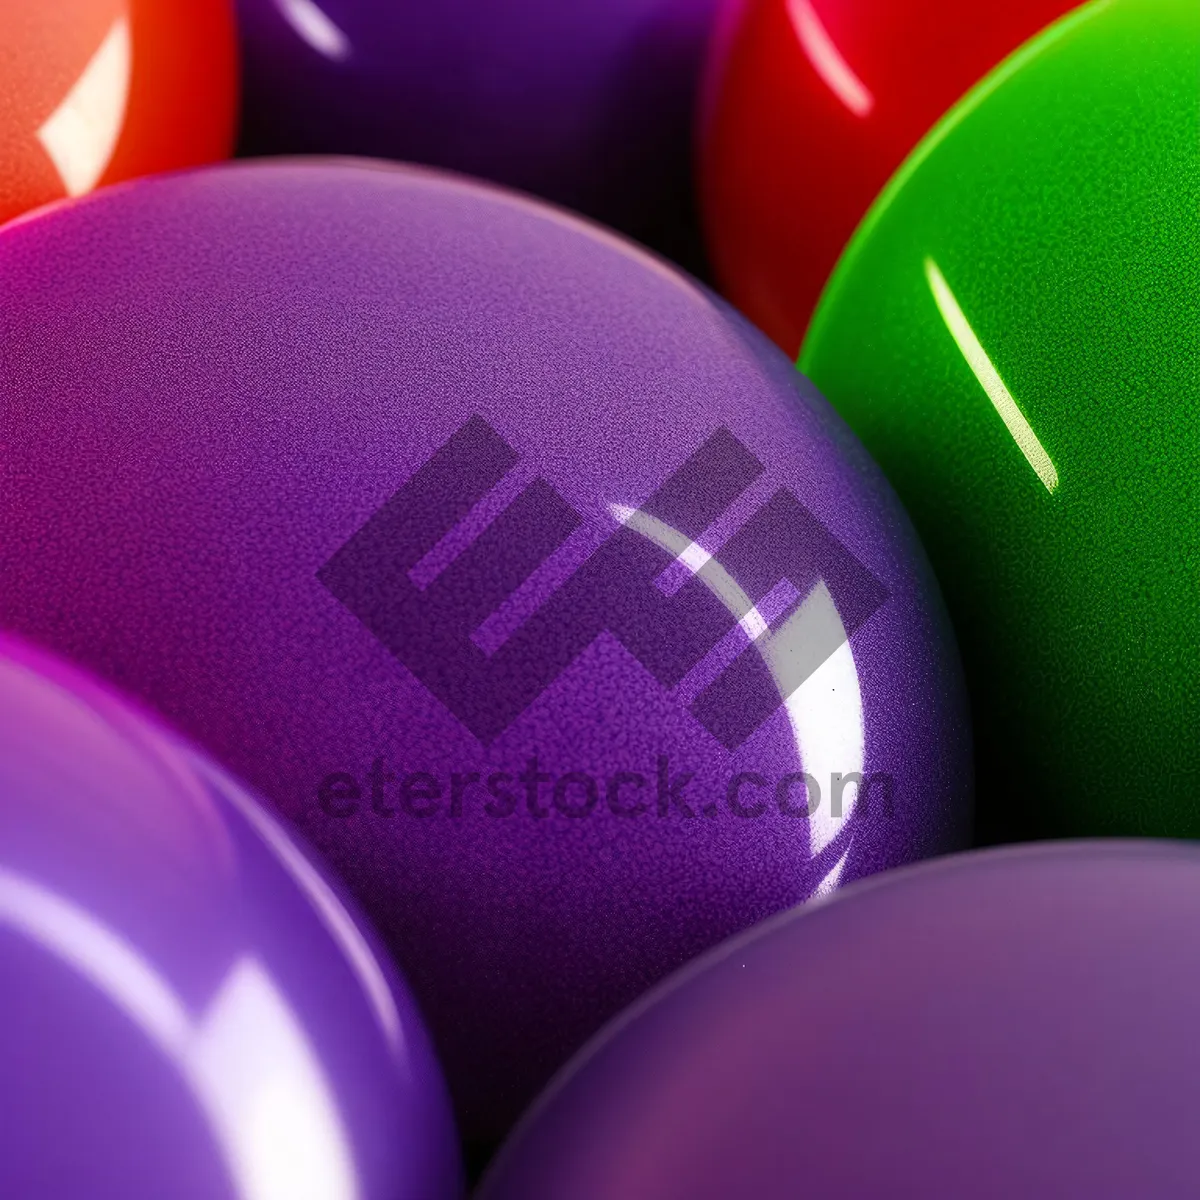 Picture of Colorful 3D Sphere Ball for Holiday Celebration.